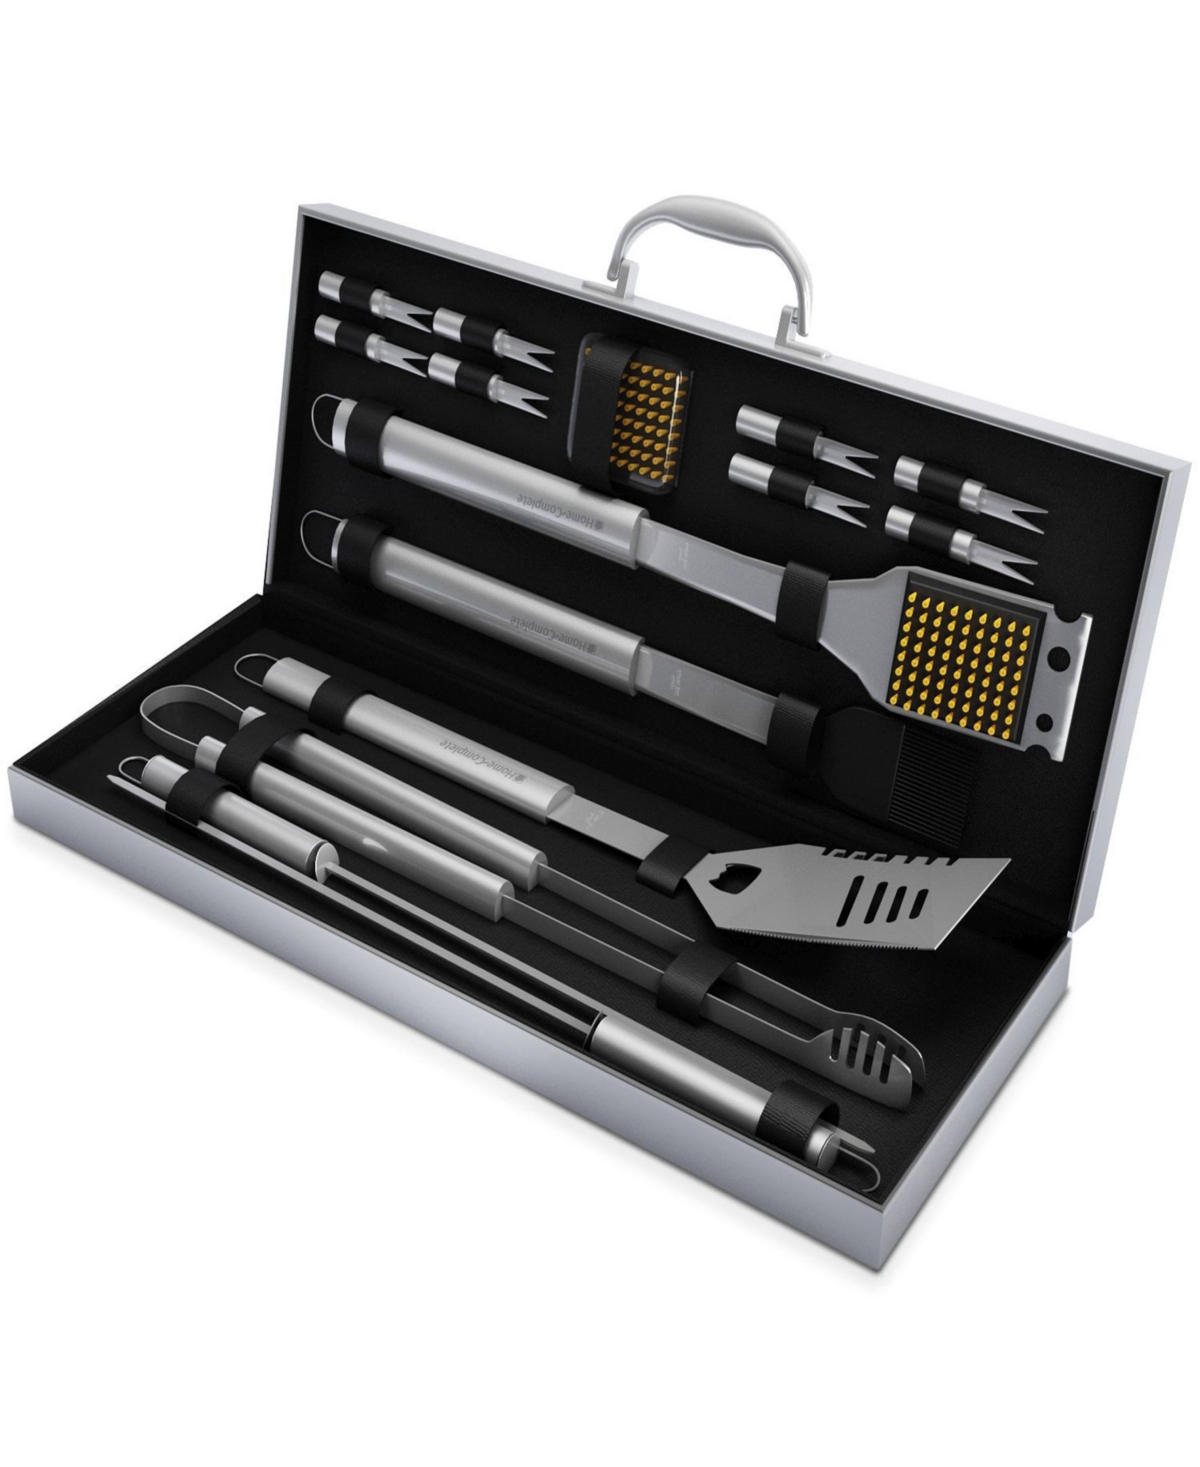 10495210 Home - Complete Bbq Grill Tool Set - 16 Piece sku 10495210